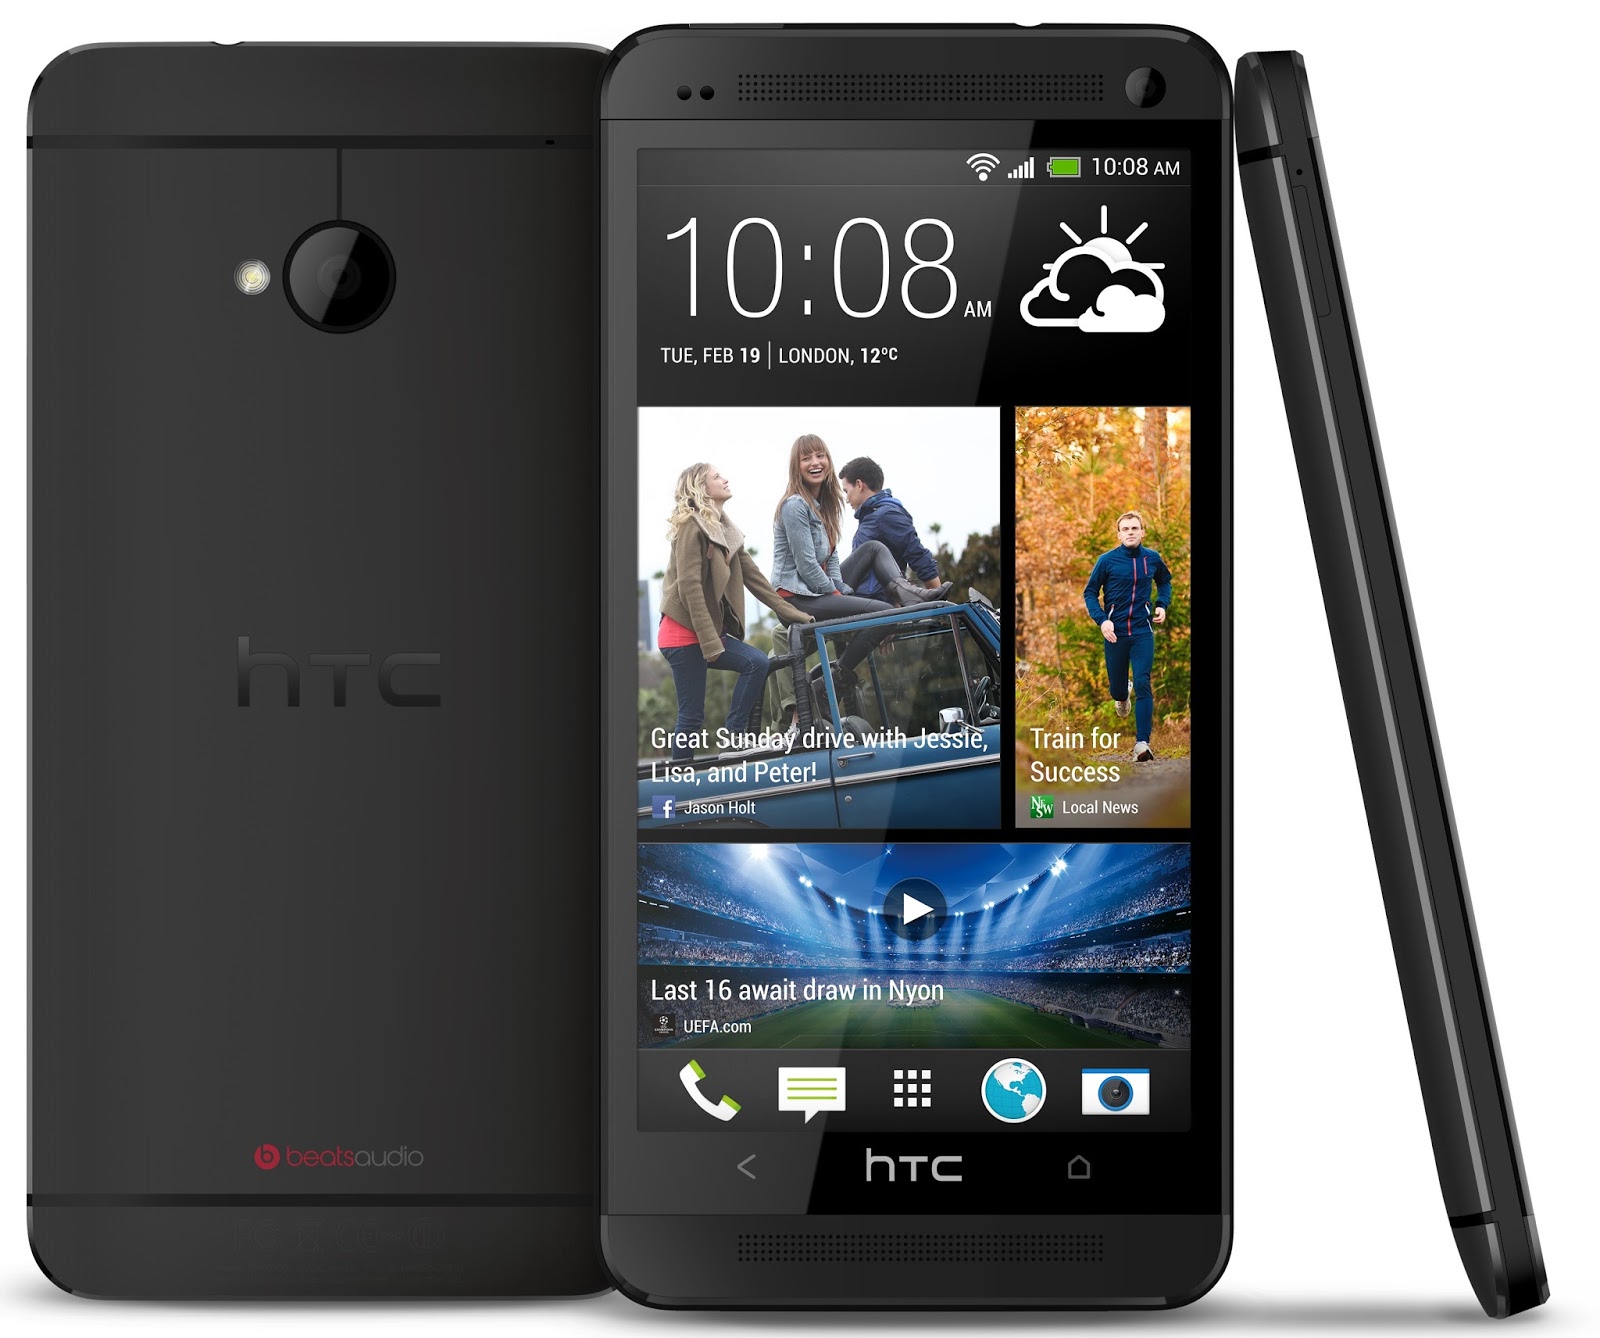 Specifications of HTC one